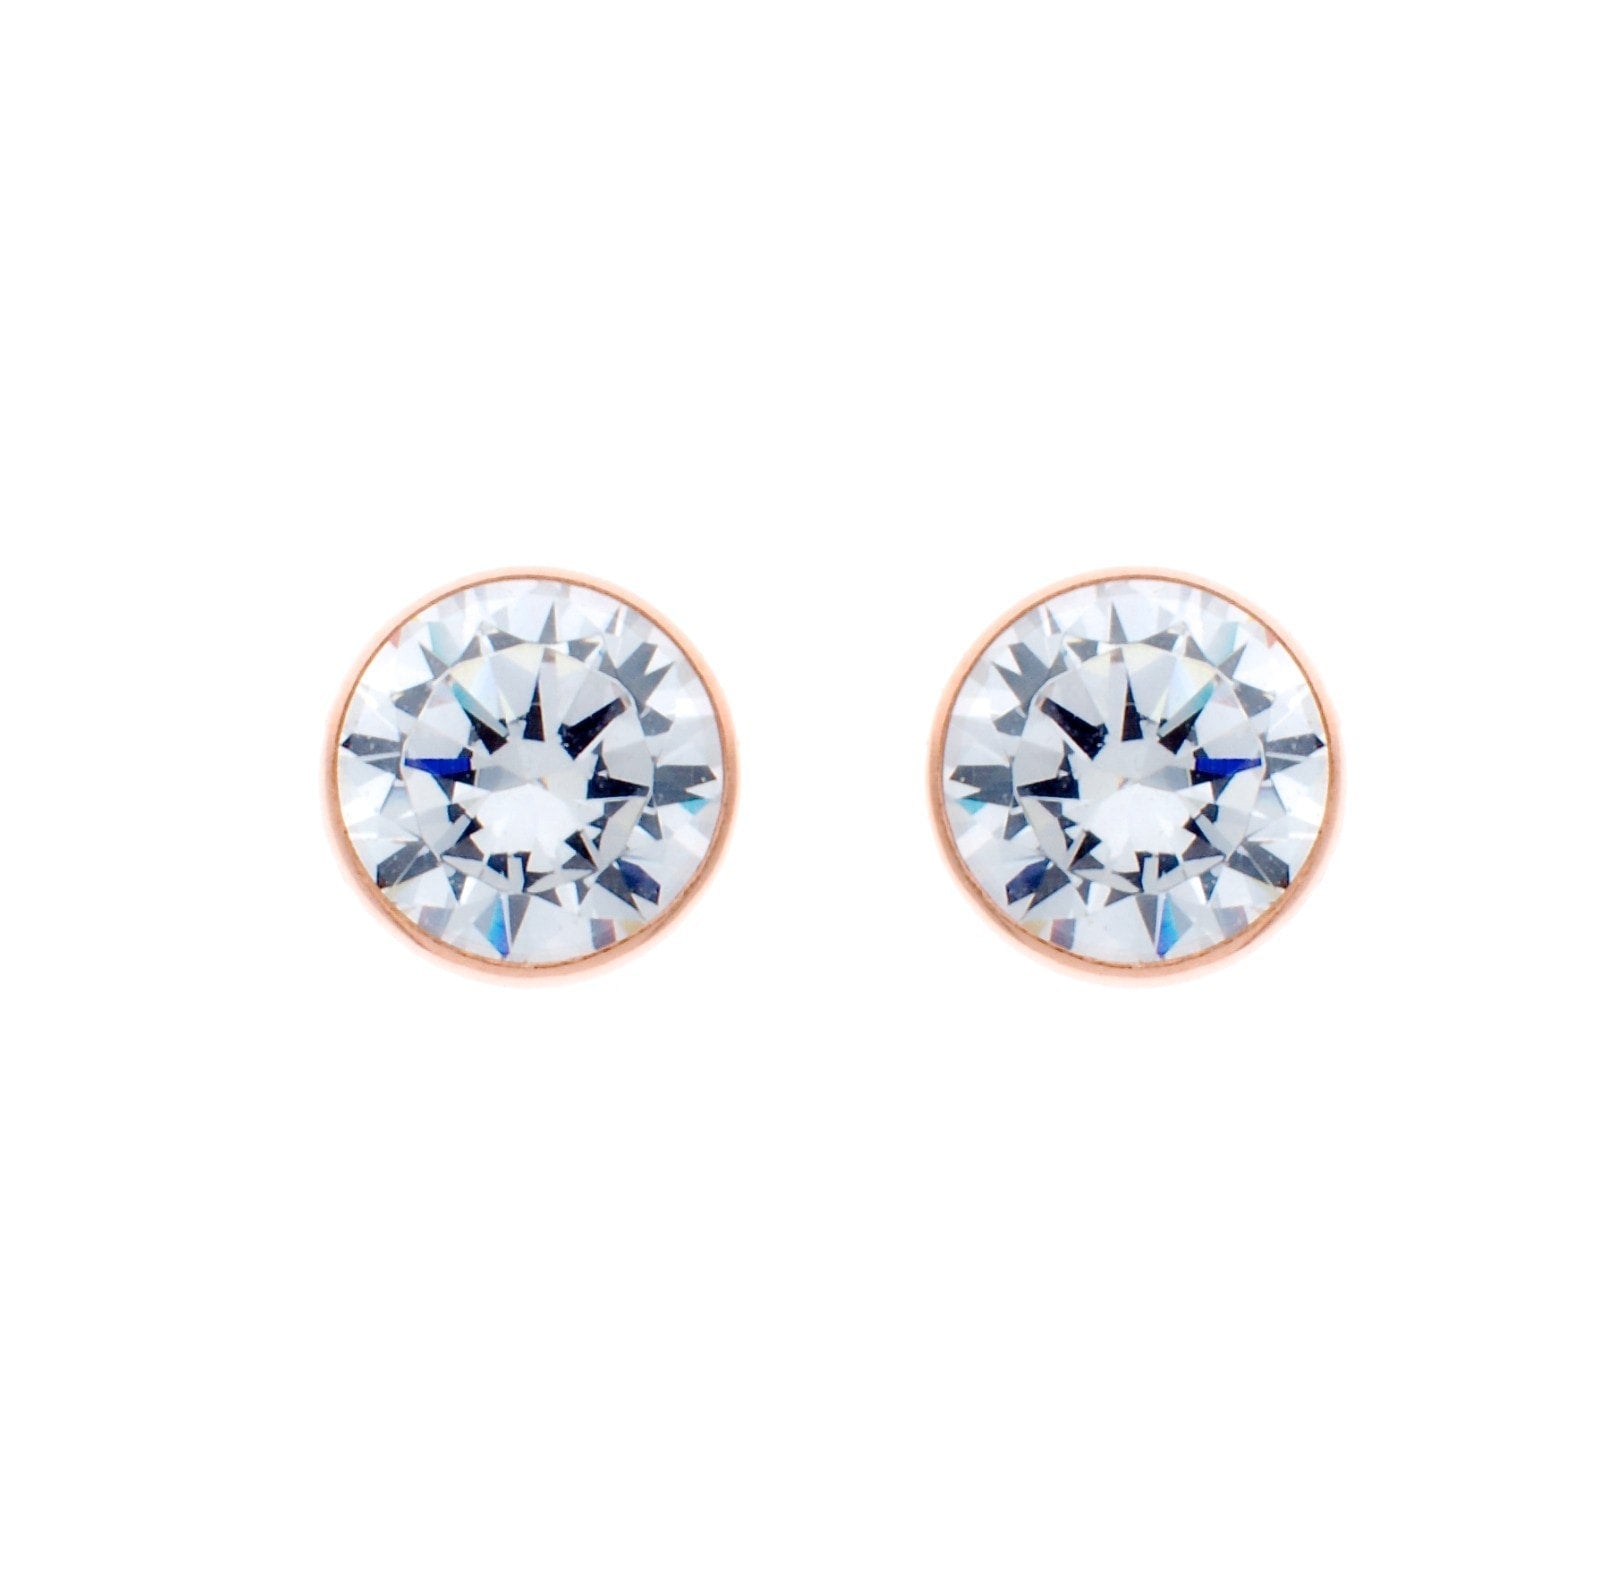 Sybella Earrings Sybella 7 Mm Cubic With Rose Gold Earring